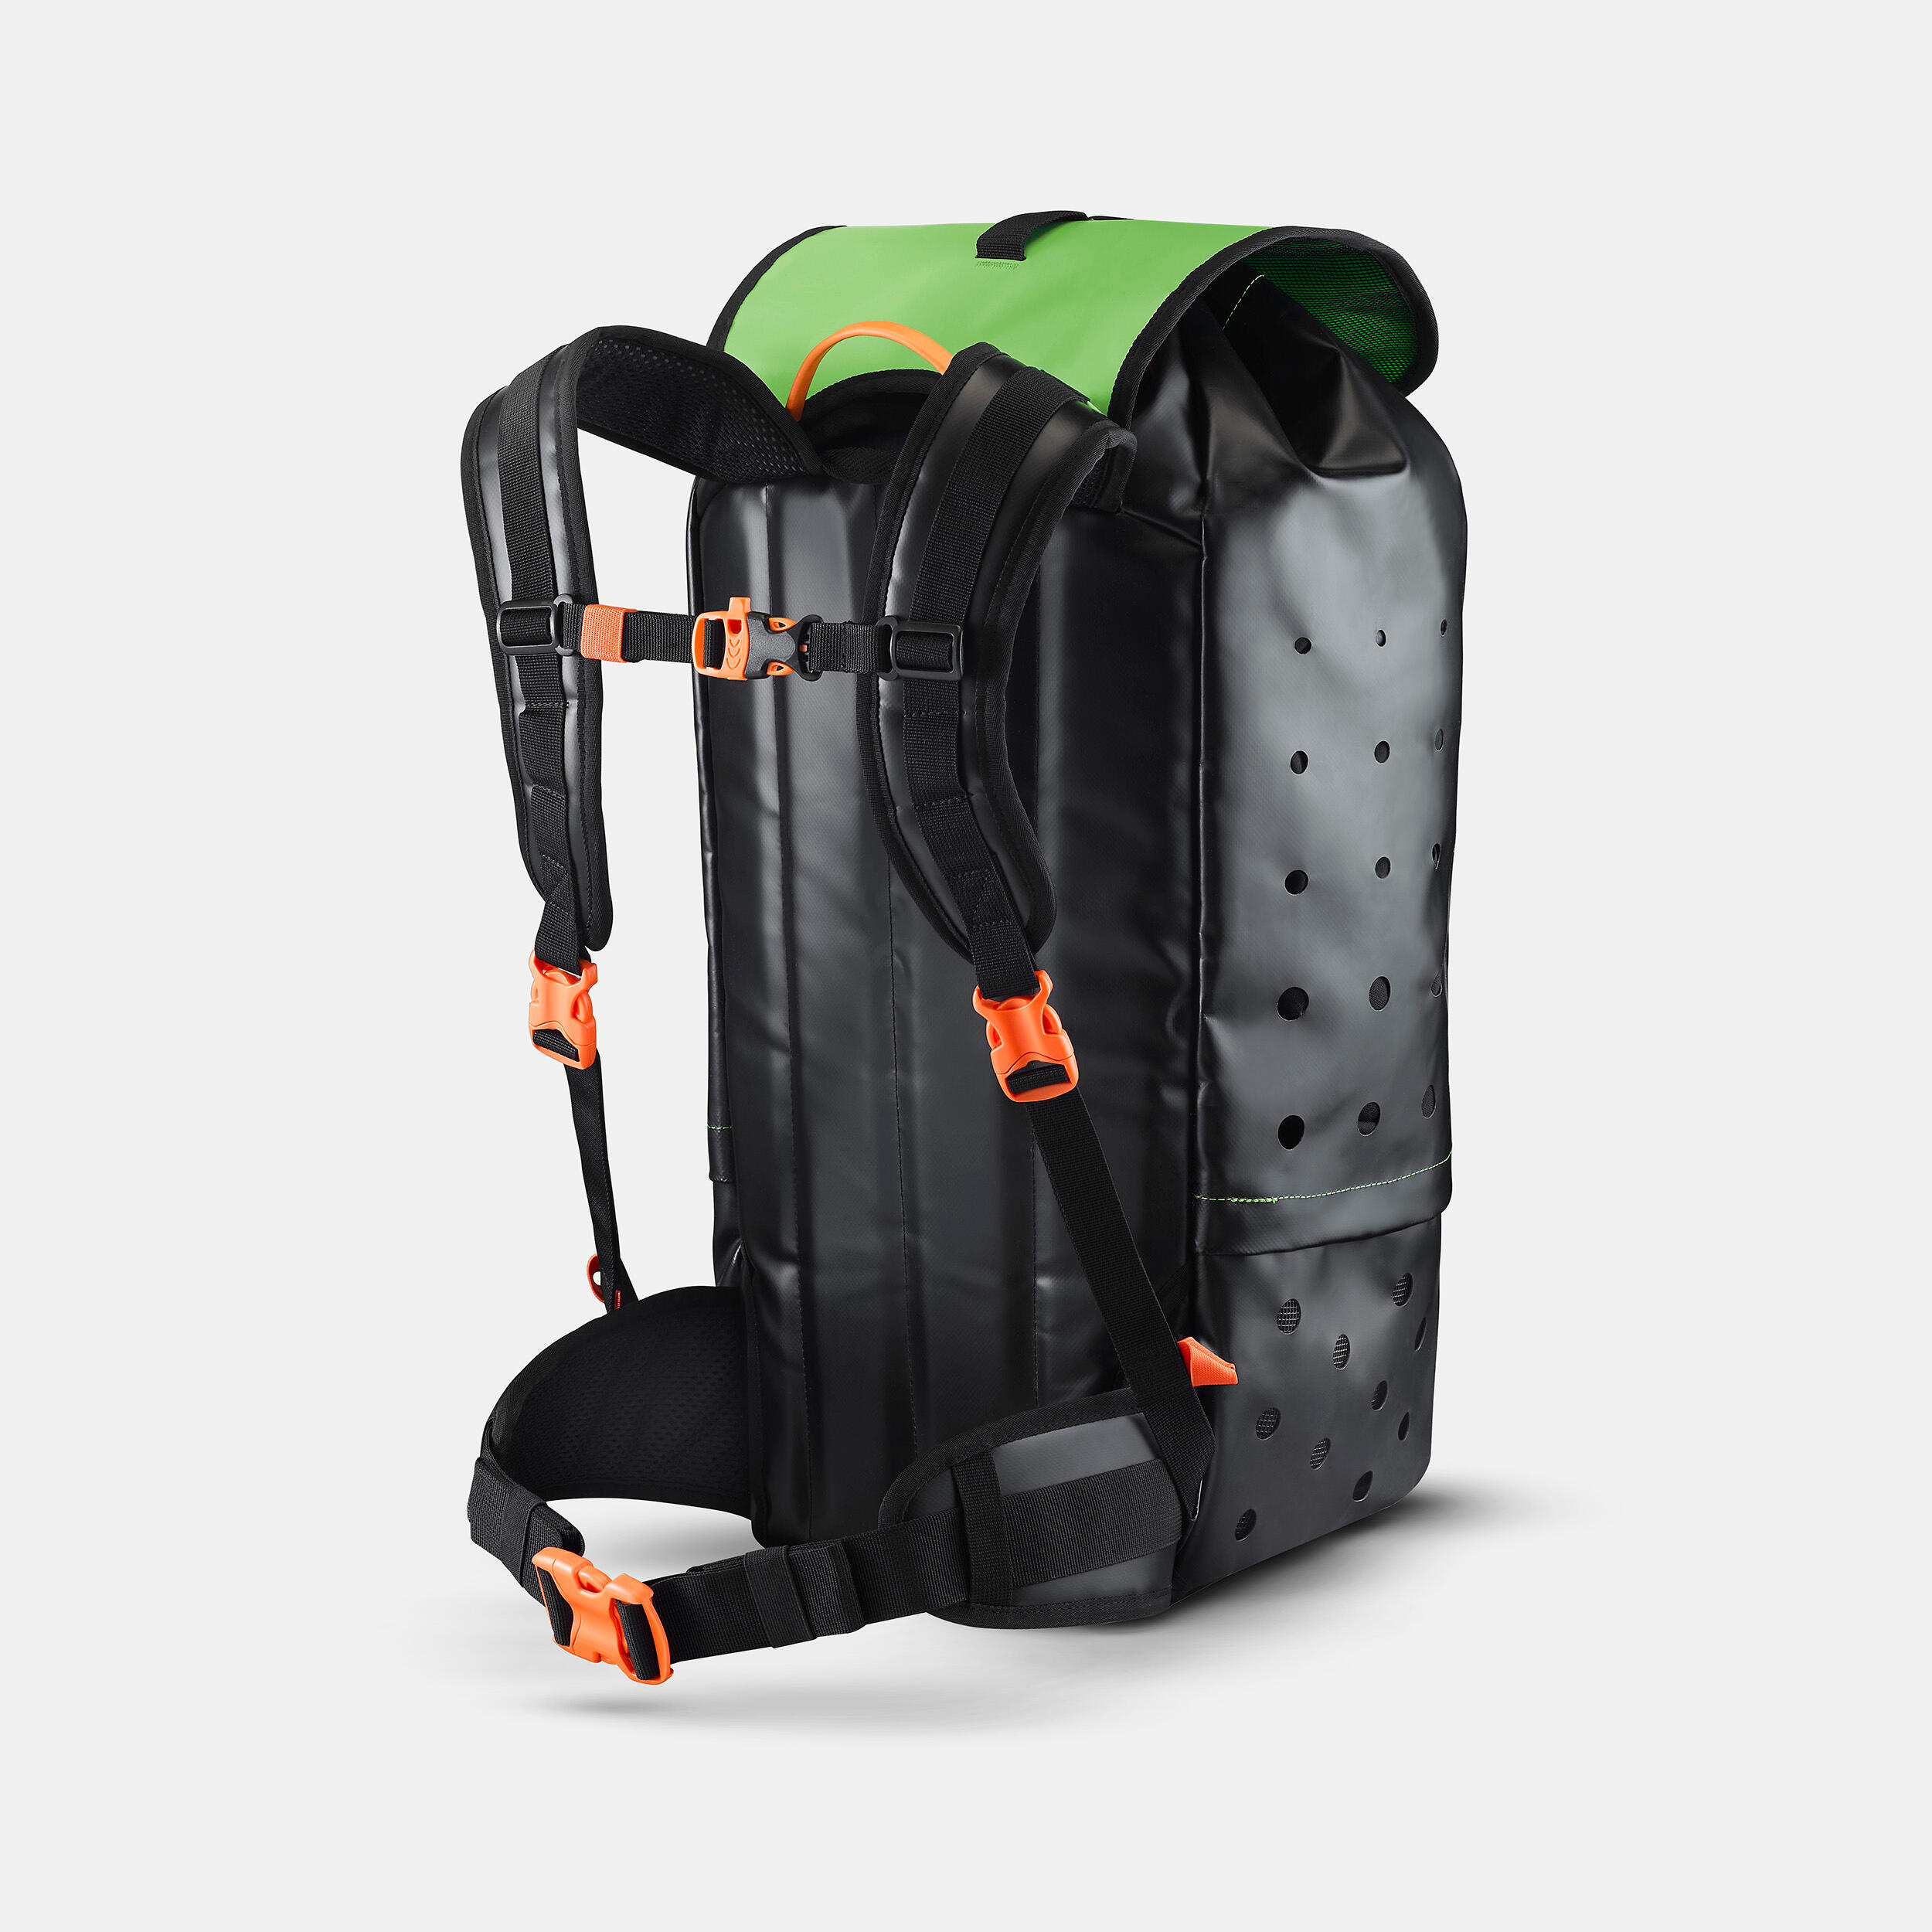 Canyoning backpack 35L - MK 900 4/12